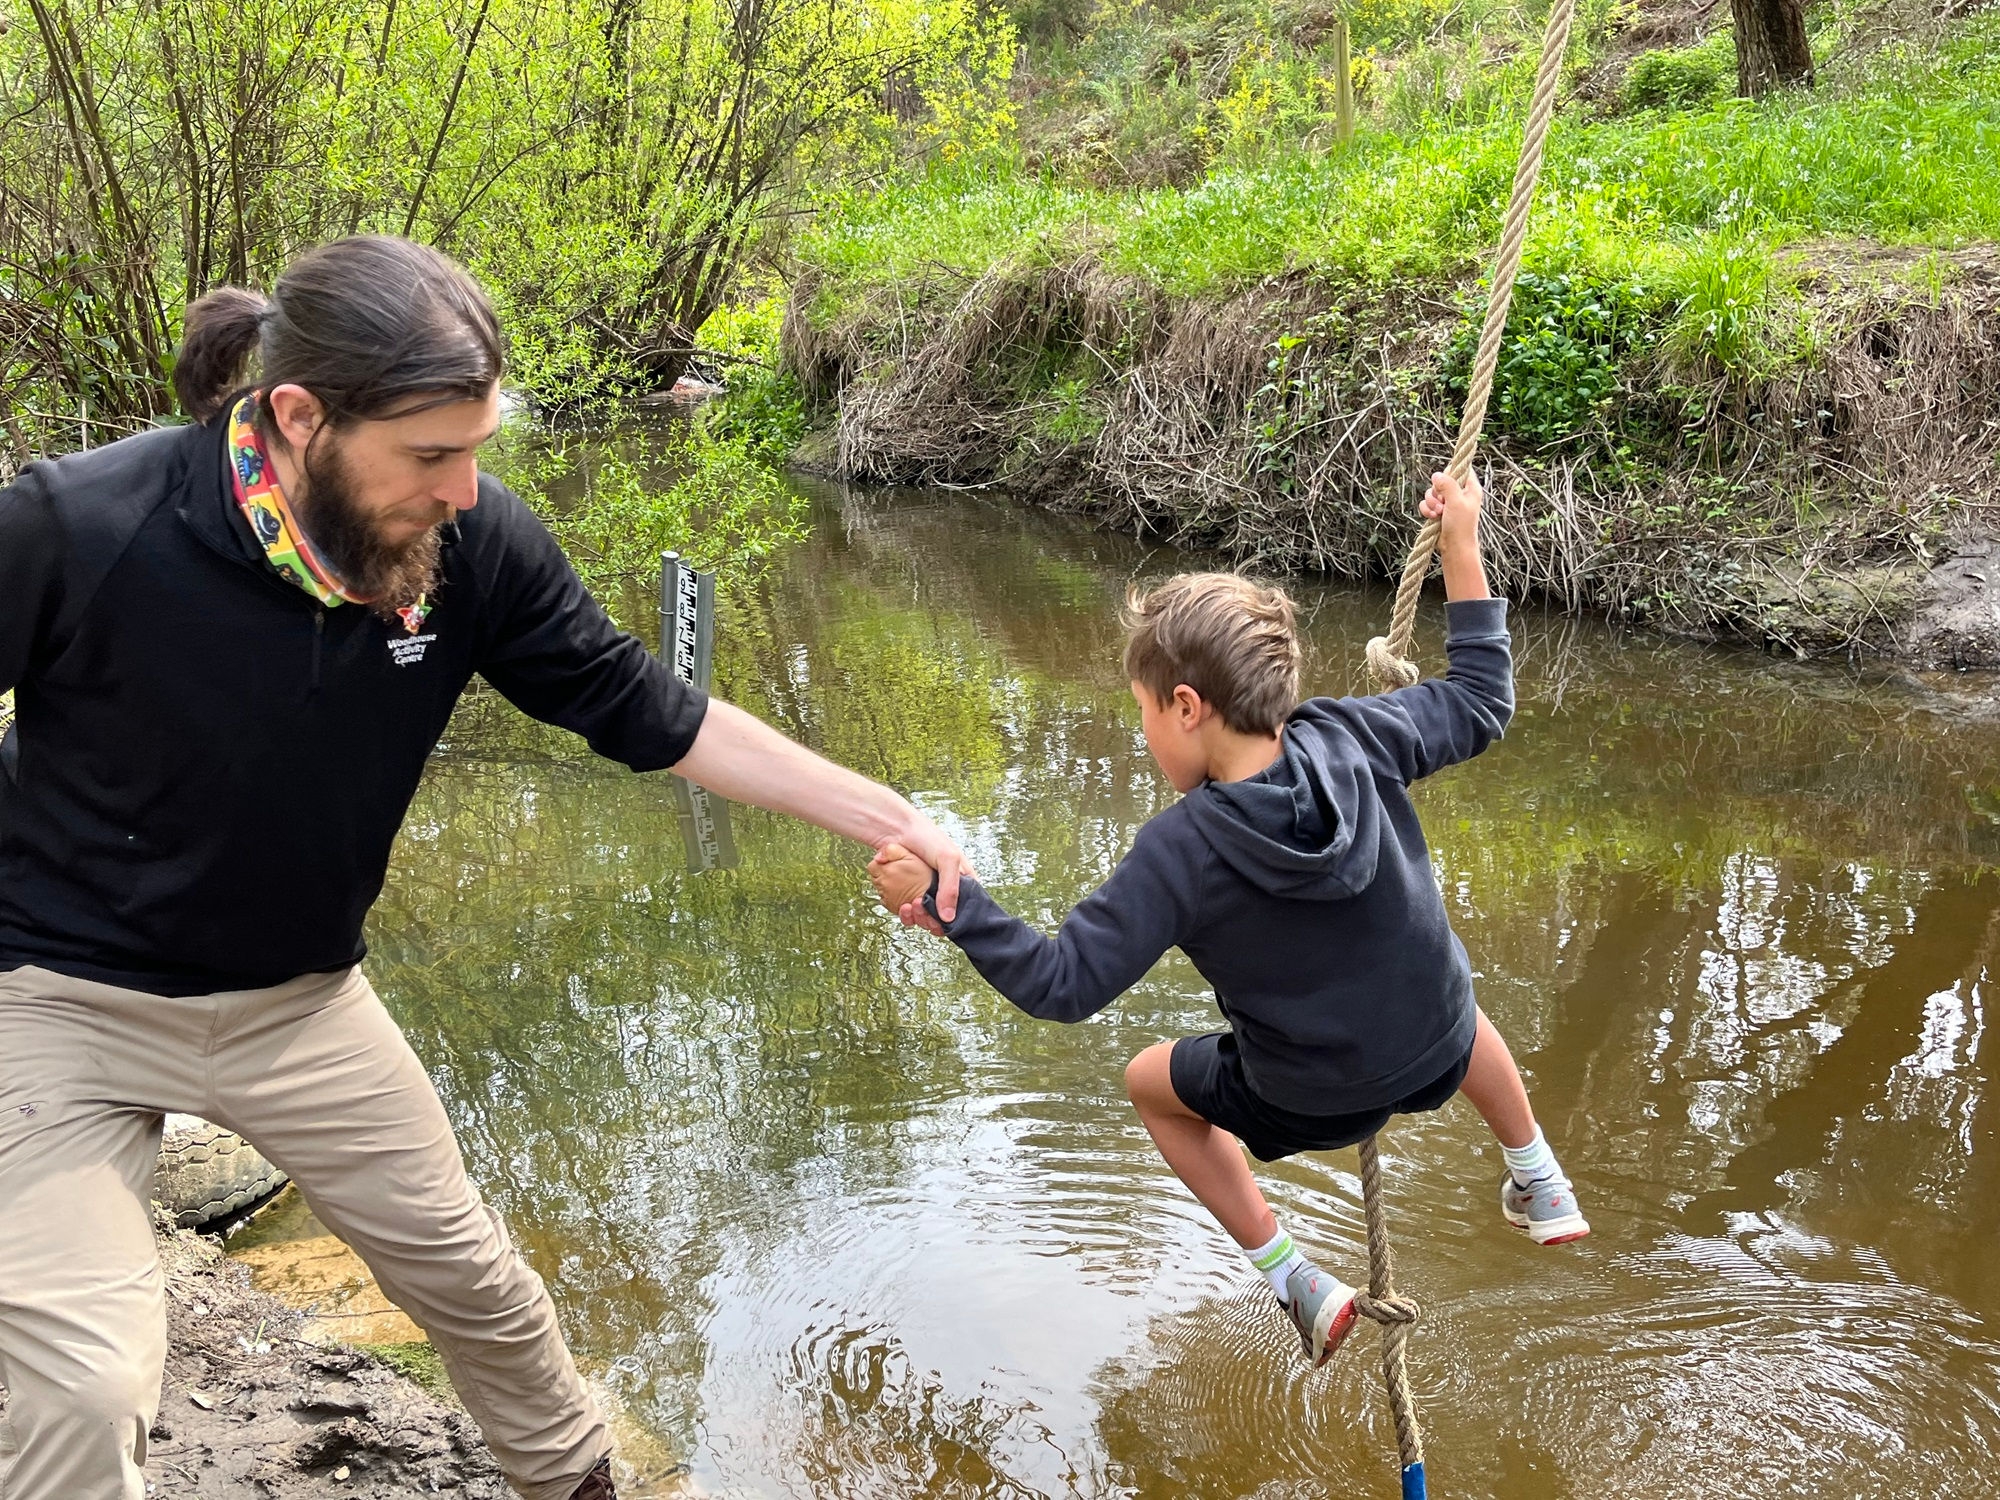 A man on the left helping a young boy holding on to a rope to swing over a creek.